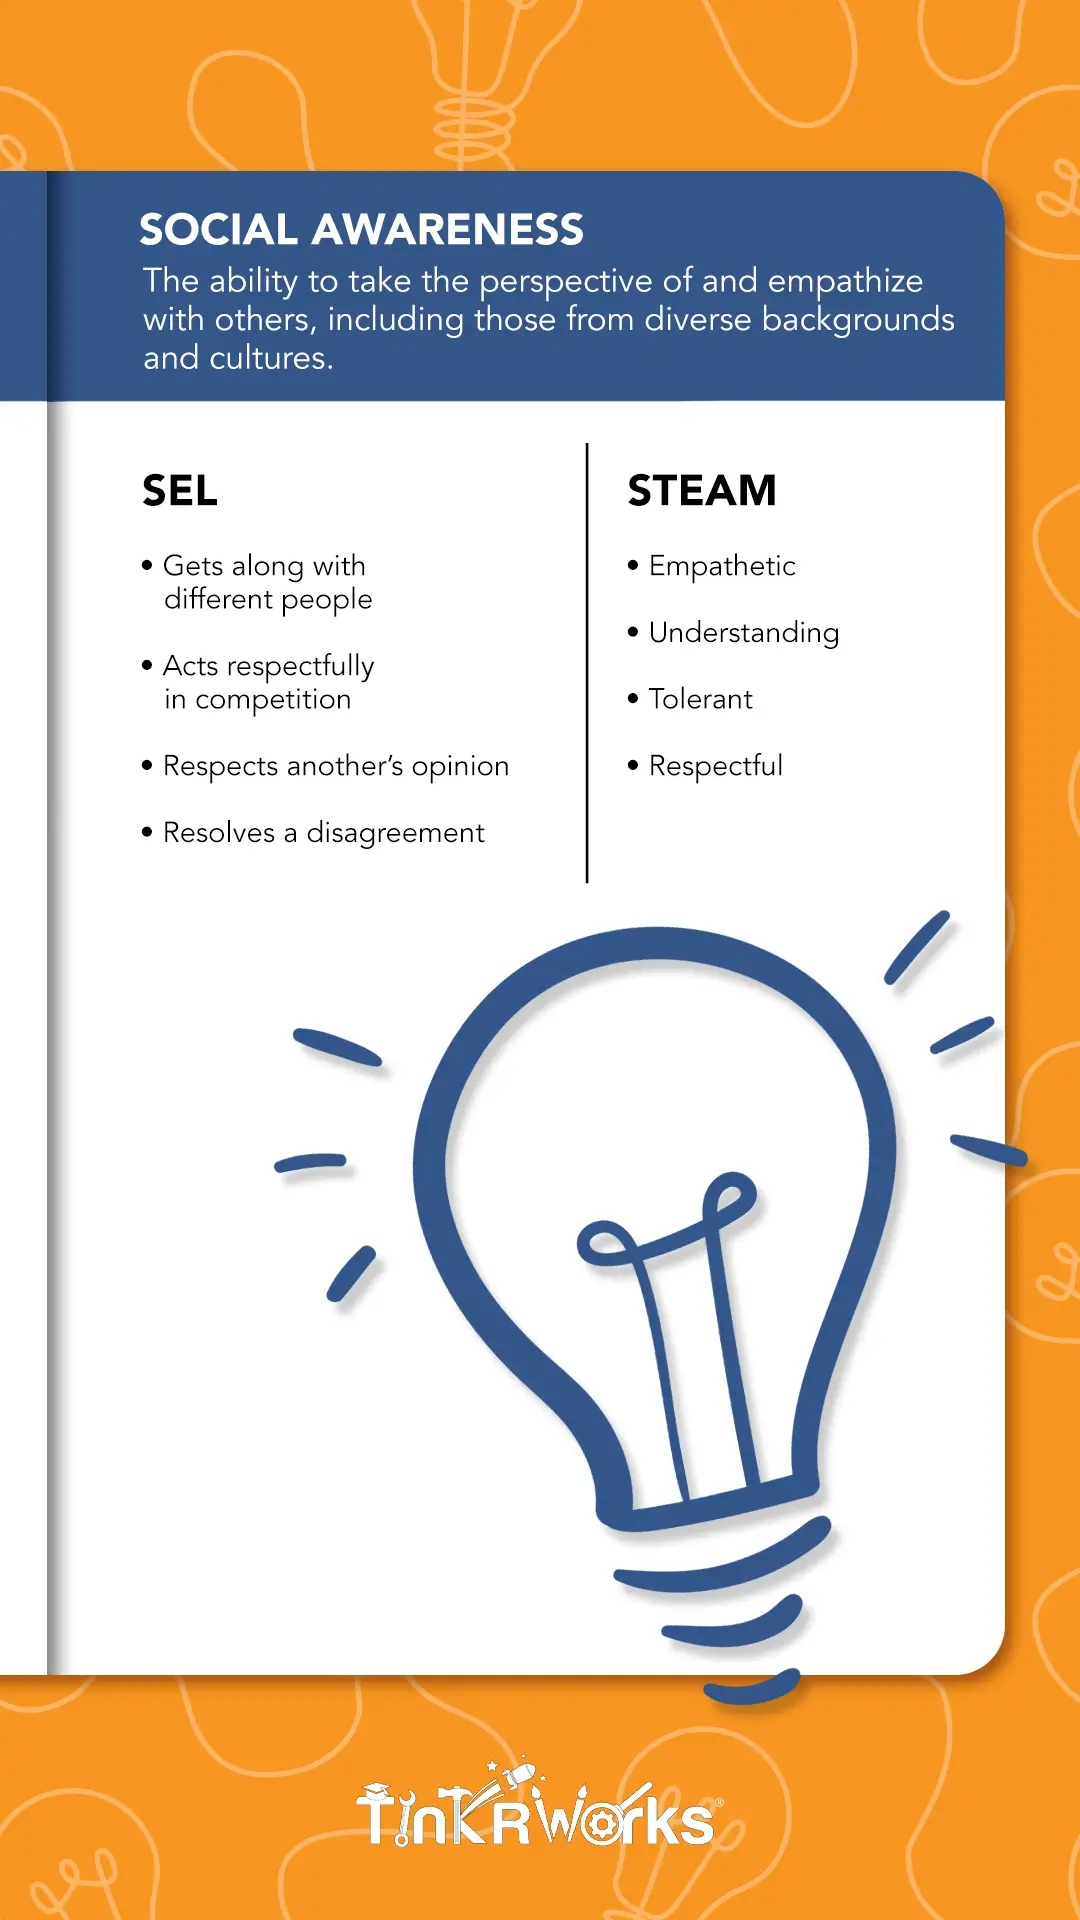 Benefits of STEAM and SEL: Social Awareness